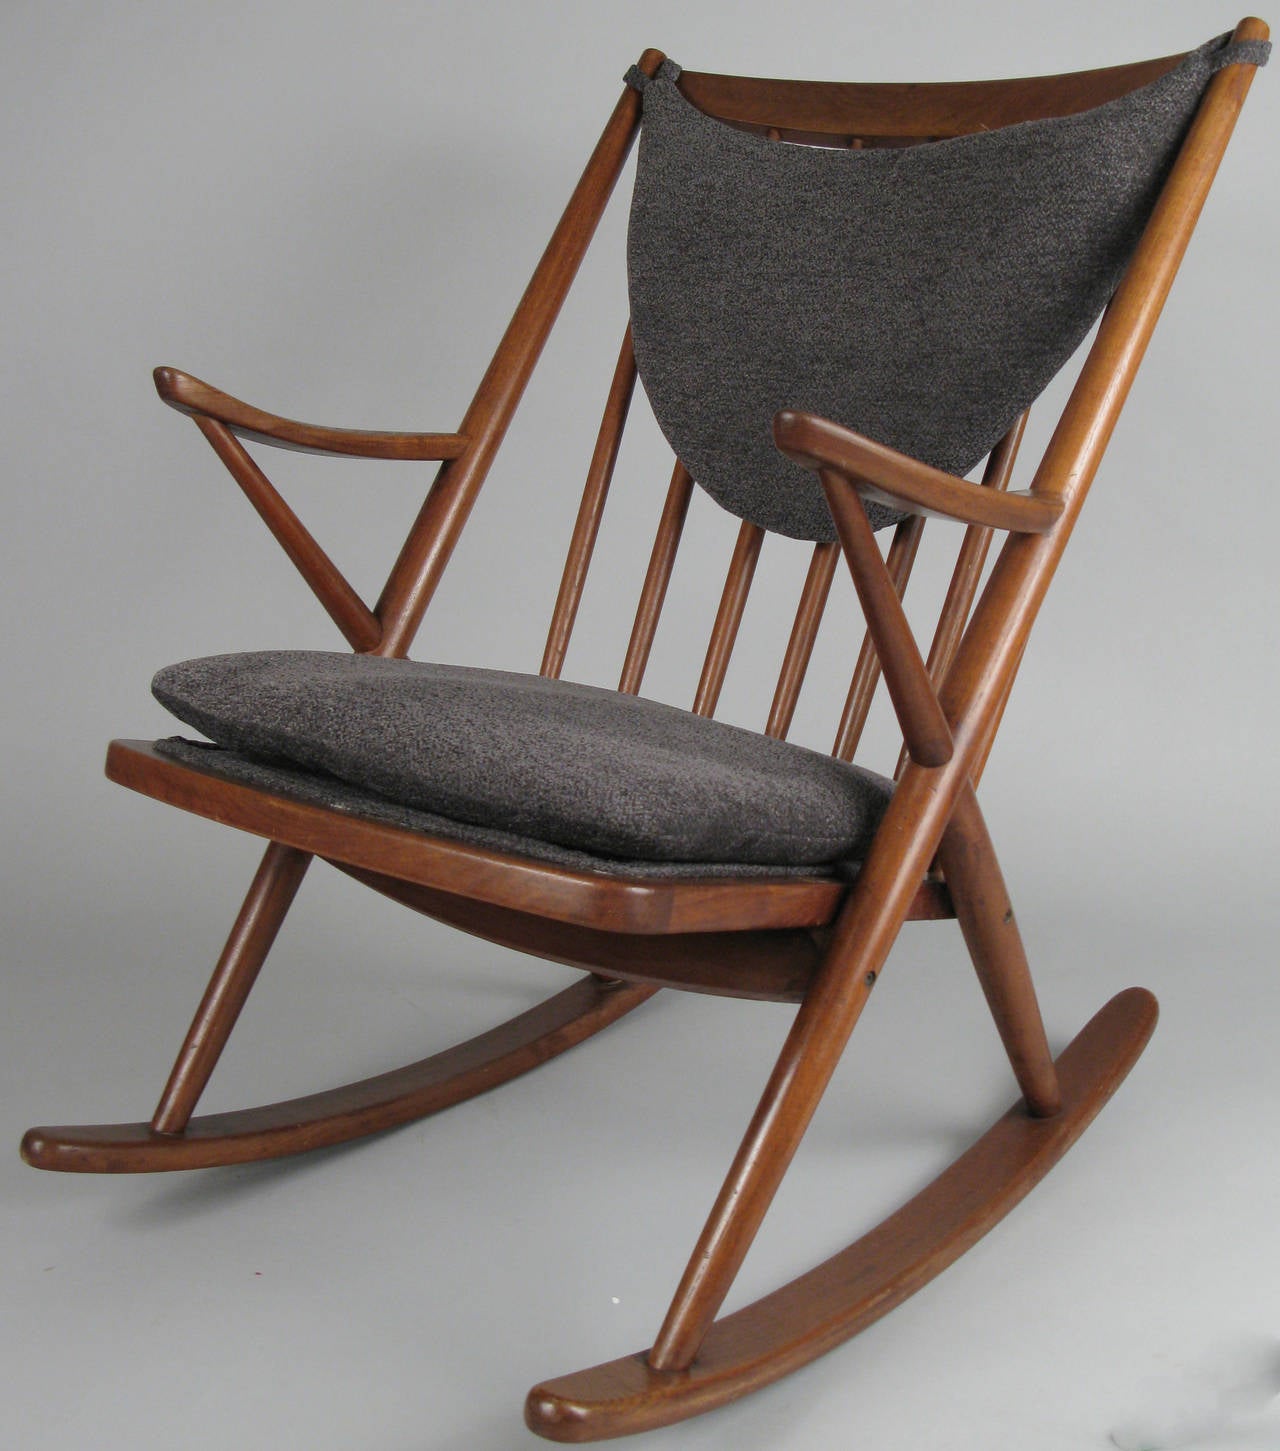 A very nice vintage 1950s Danish teak rocking chair designed by Frank Reenskaug for Brahmin. Beautiful lines and proportions, with new upholstered seat and back cushions.